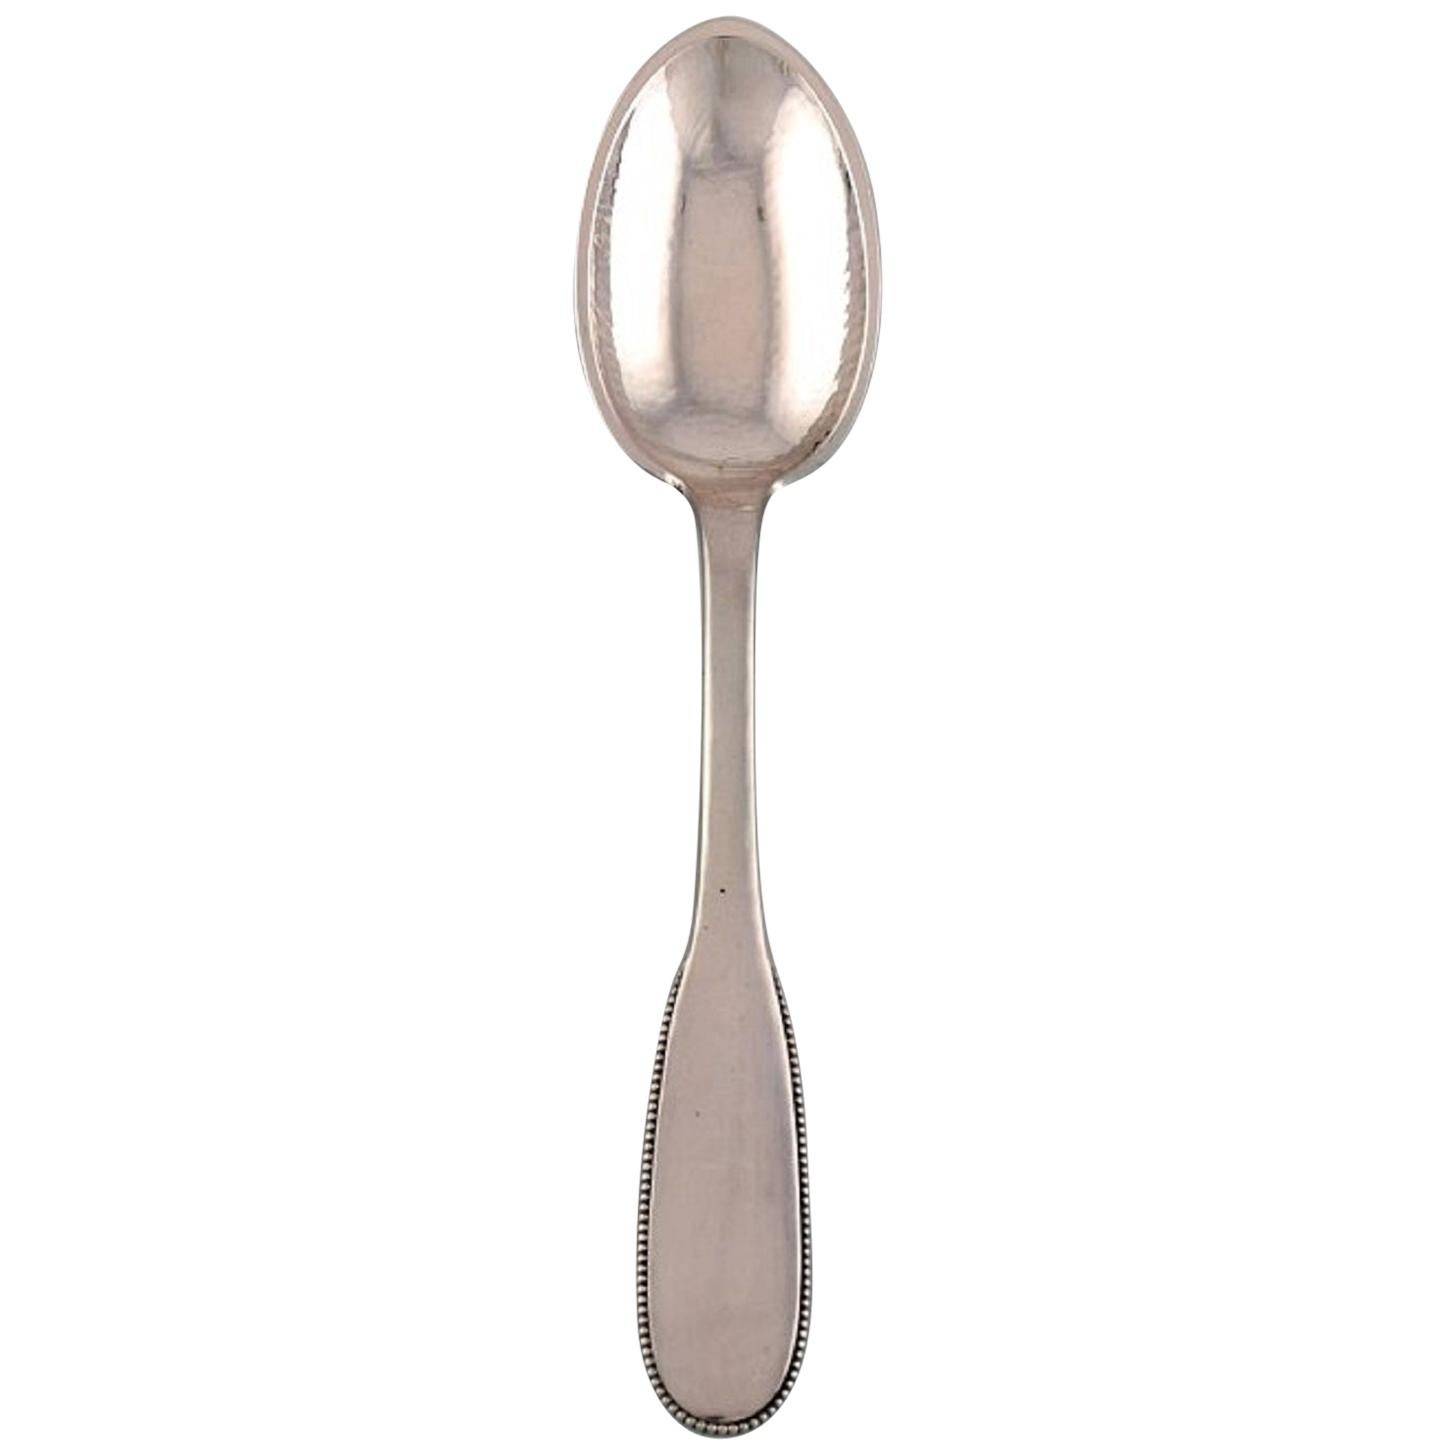 Evald Nielsen Number 14 Tablespoon in Hammered Silver, 1920s